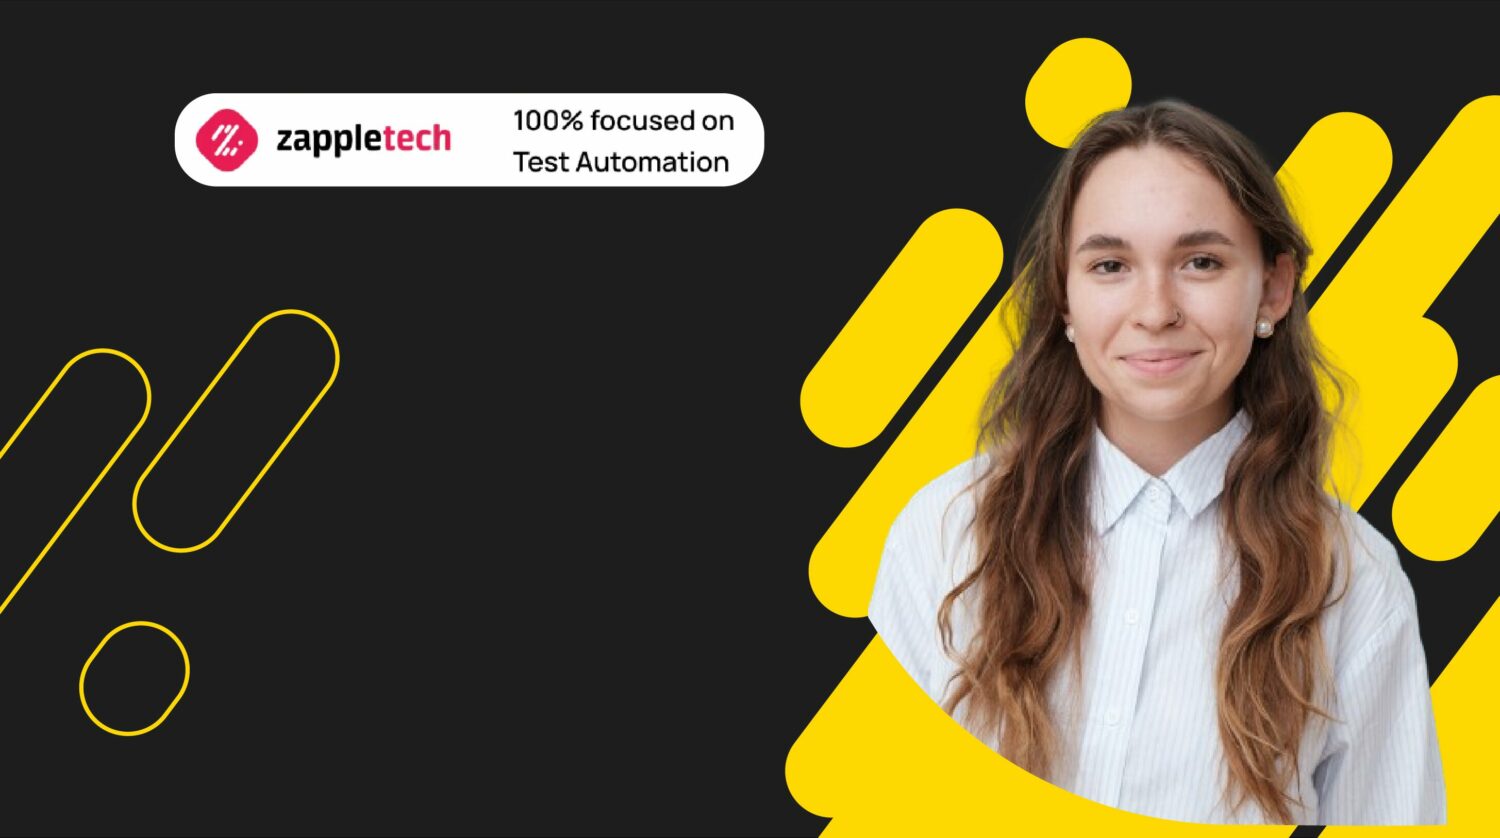 Alex Pshe – 13 Best Practices for Building Web App Test Automation from Scratch